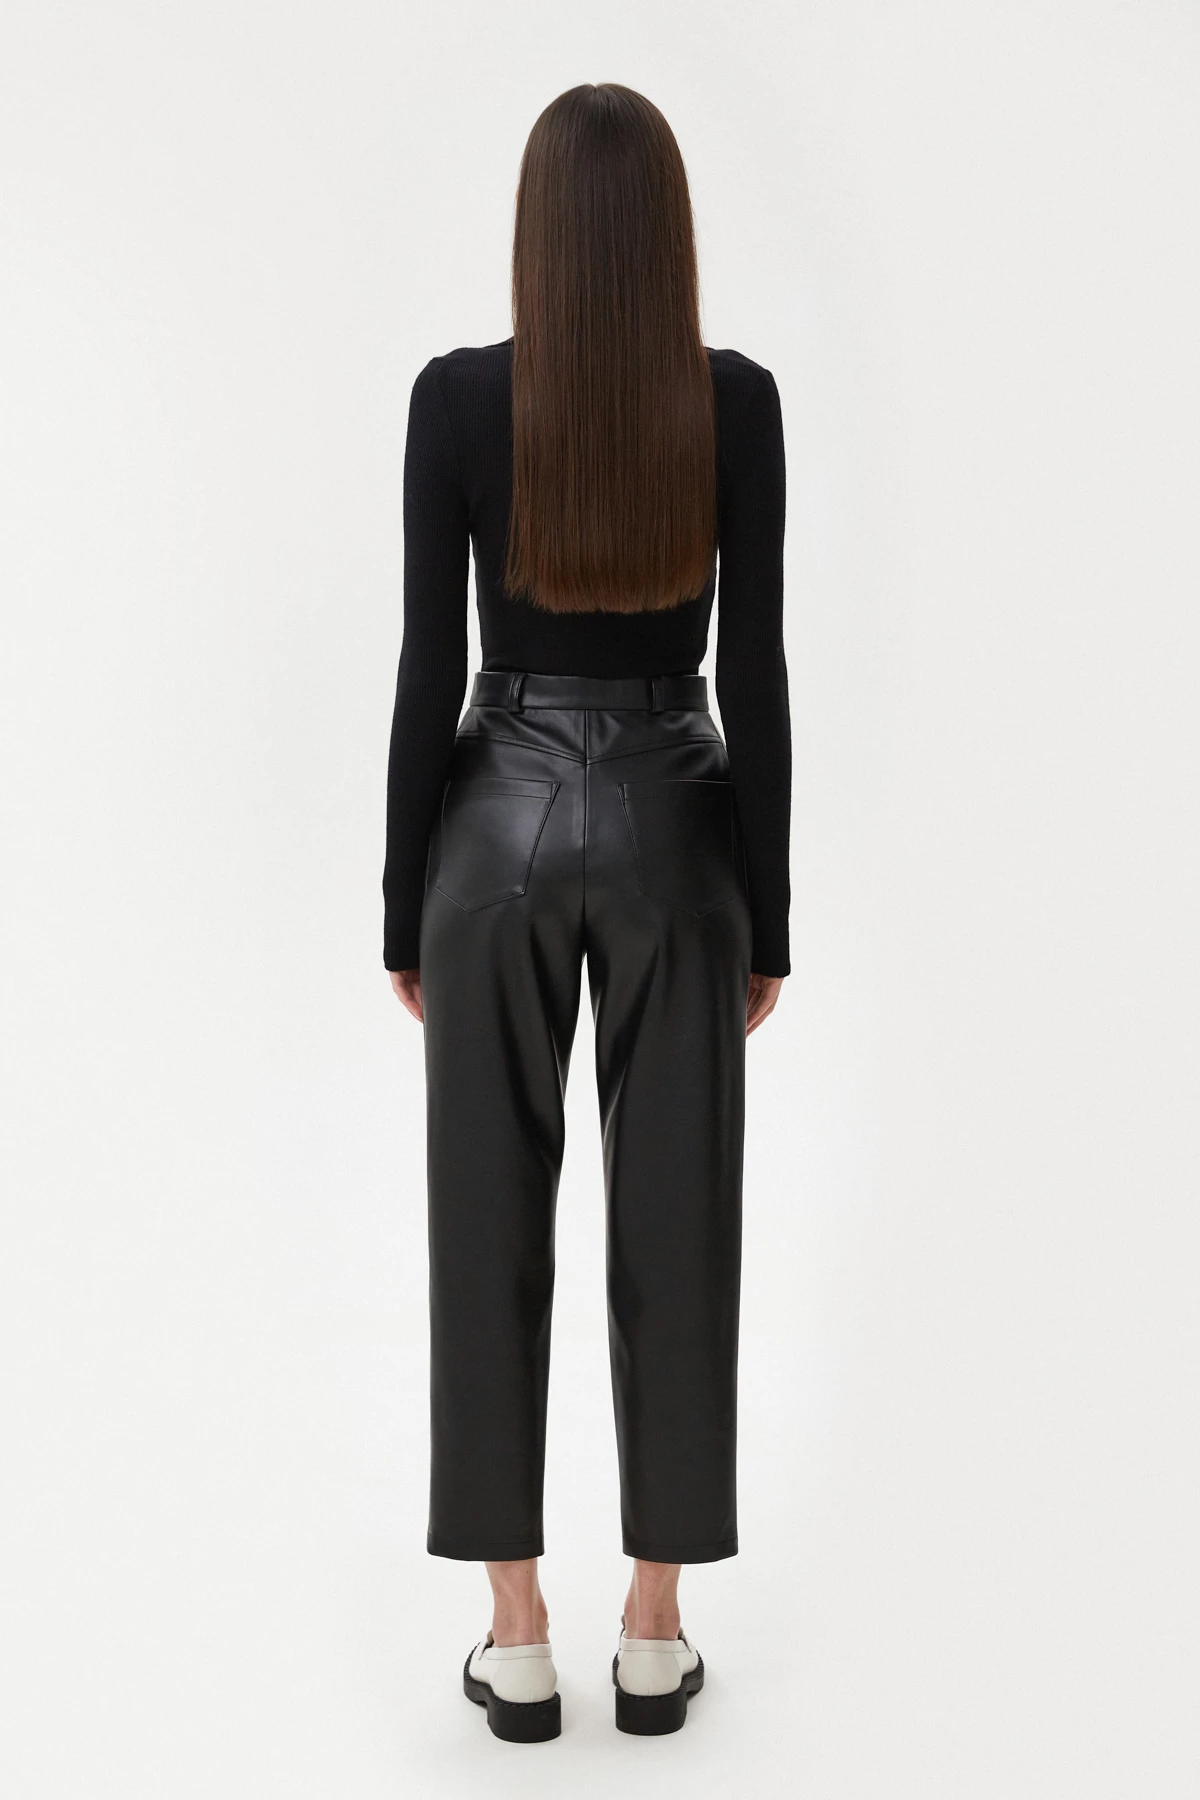 Black cropped pants made of eco-leather, photo 4